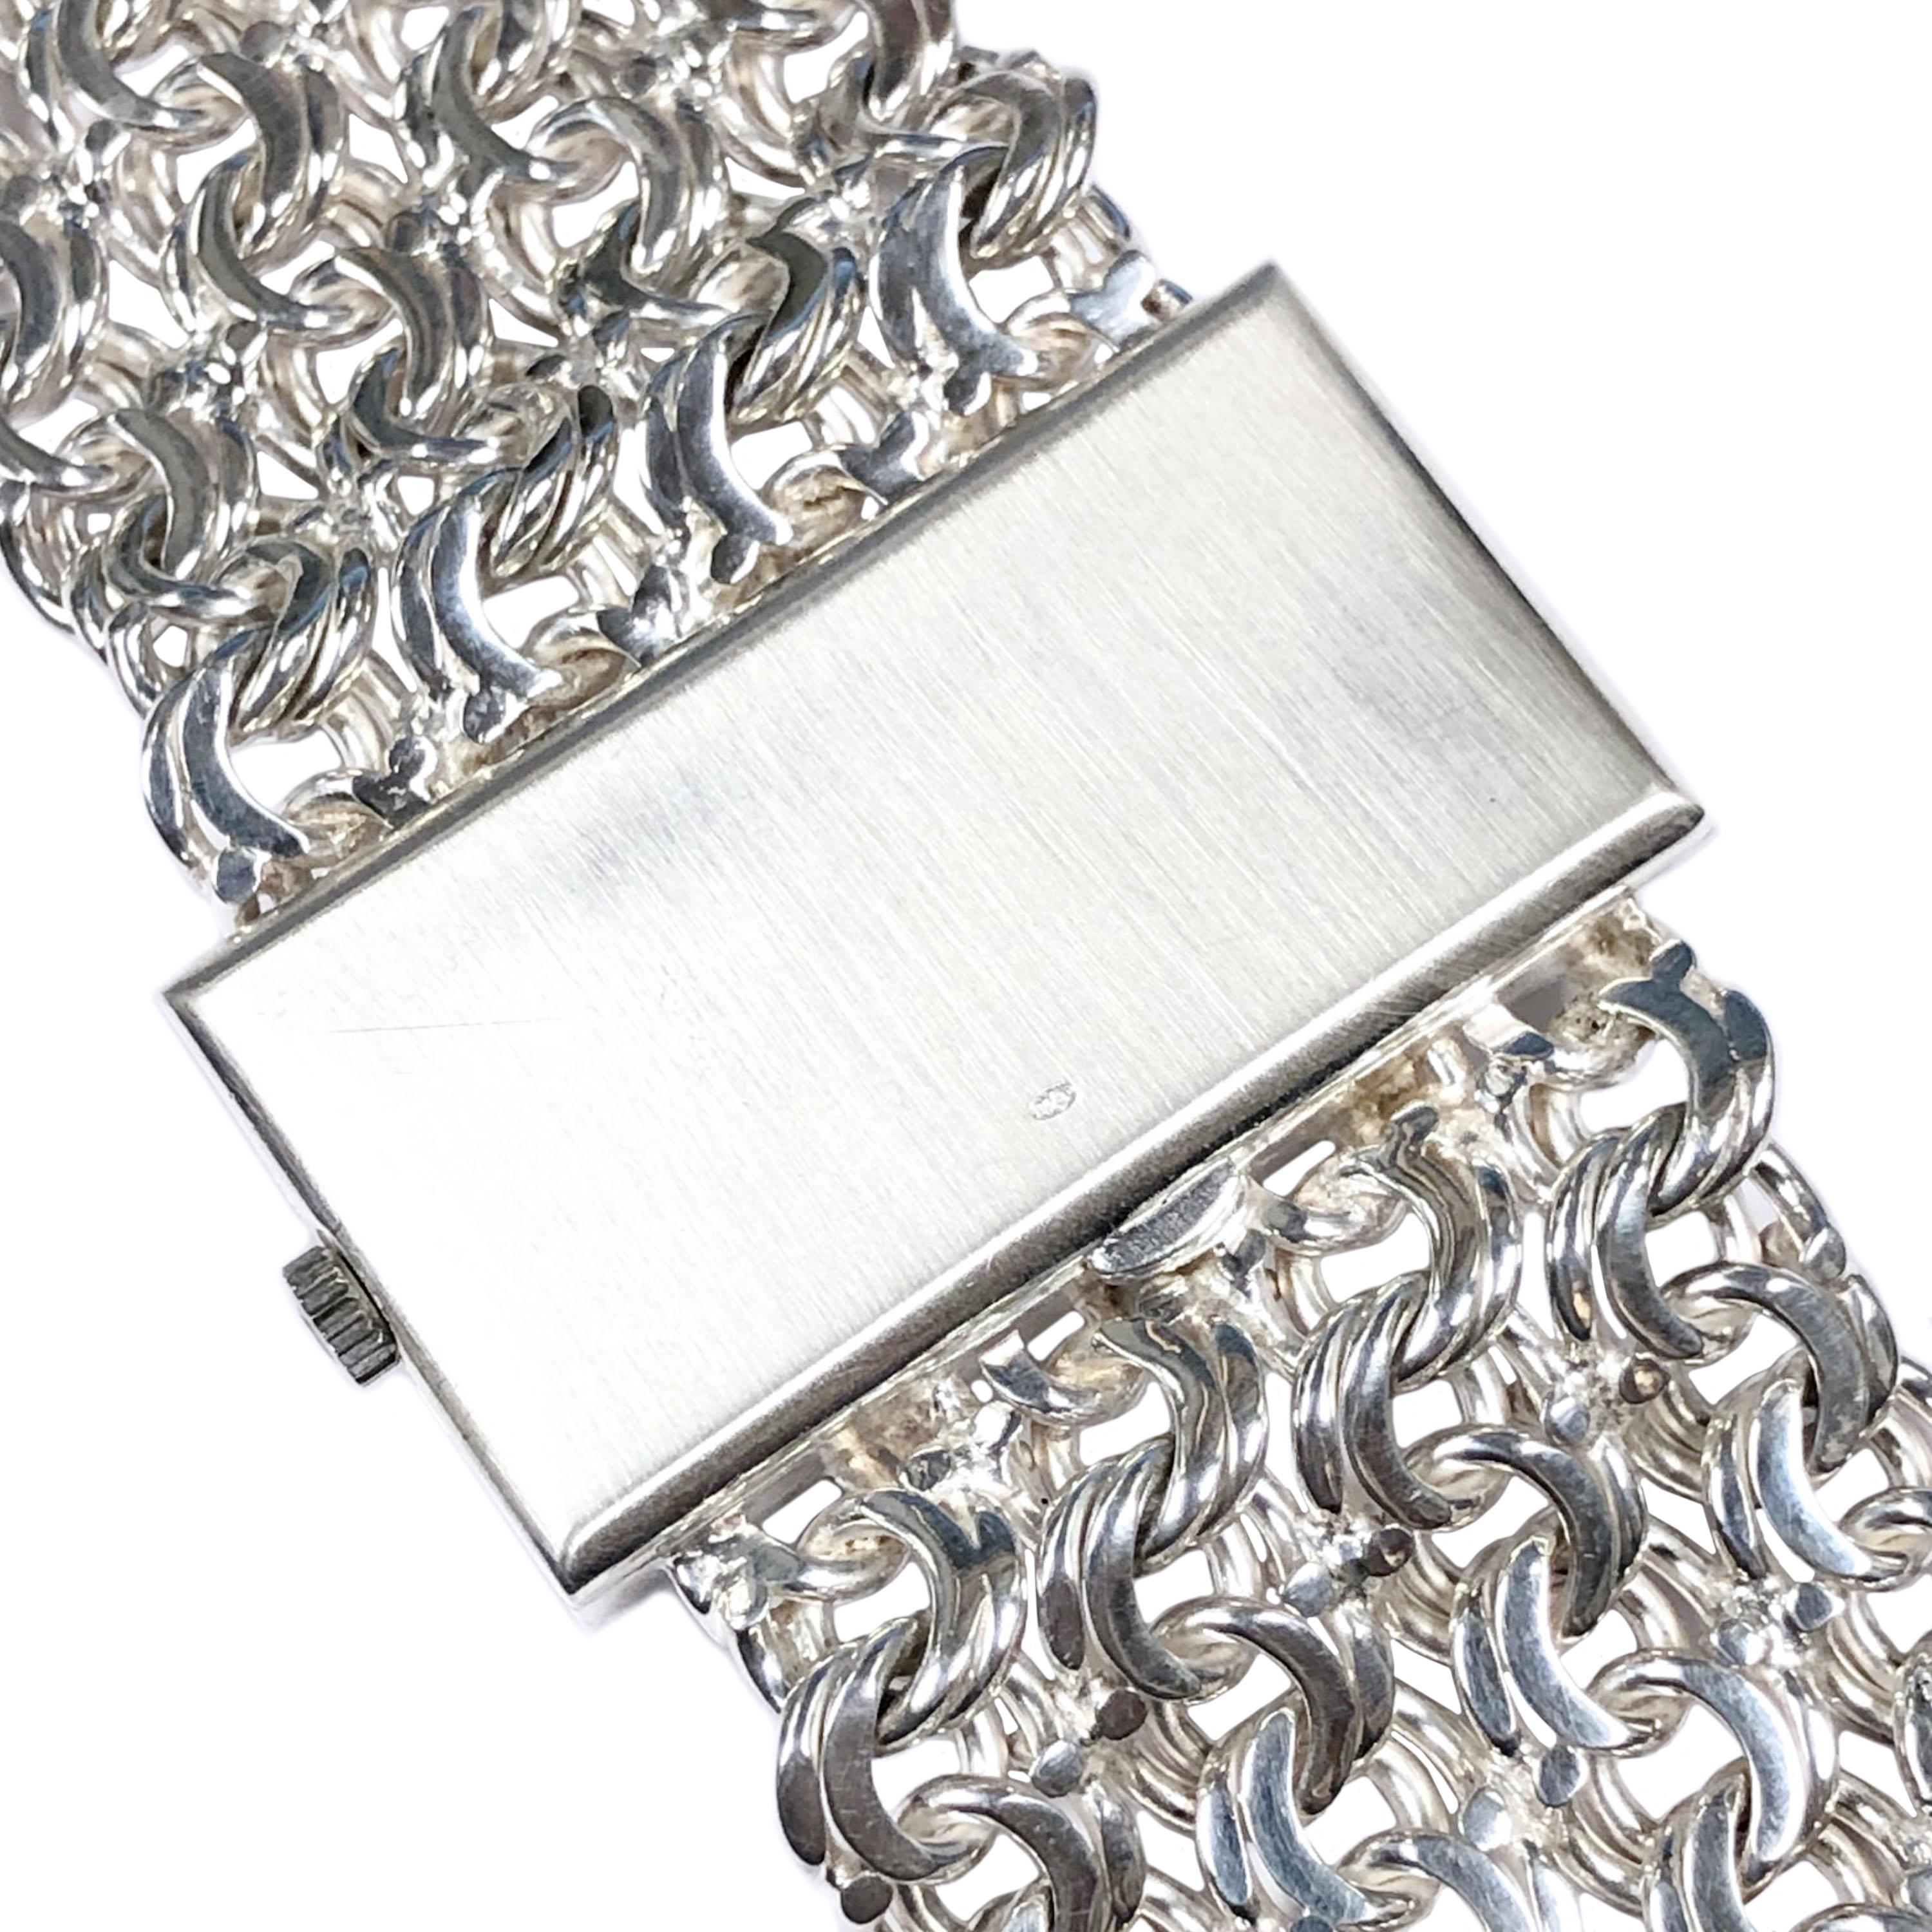 Circa 1970 Omega De Ville Bracelet Watch, Sterling Silver 2 piece Case measuring 1 1/2 X 3/4 inch, attached sterling Silver very soft and flexible link bracelet measuring 1 1/4 inch wide. Total watch length 7 1/2 inches. 17 Jewel Mechanical, Manual